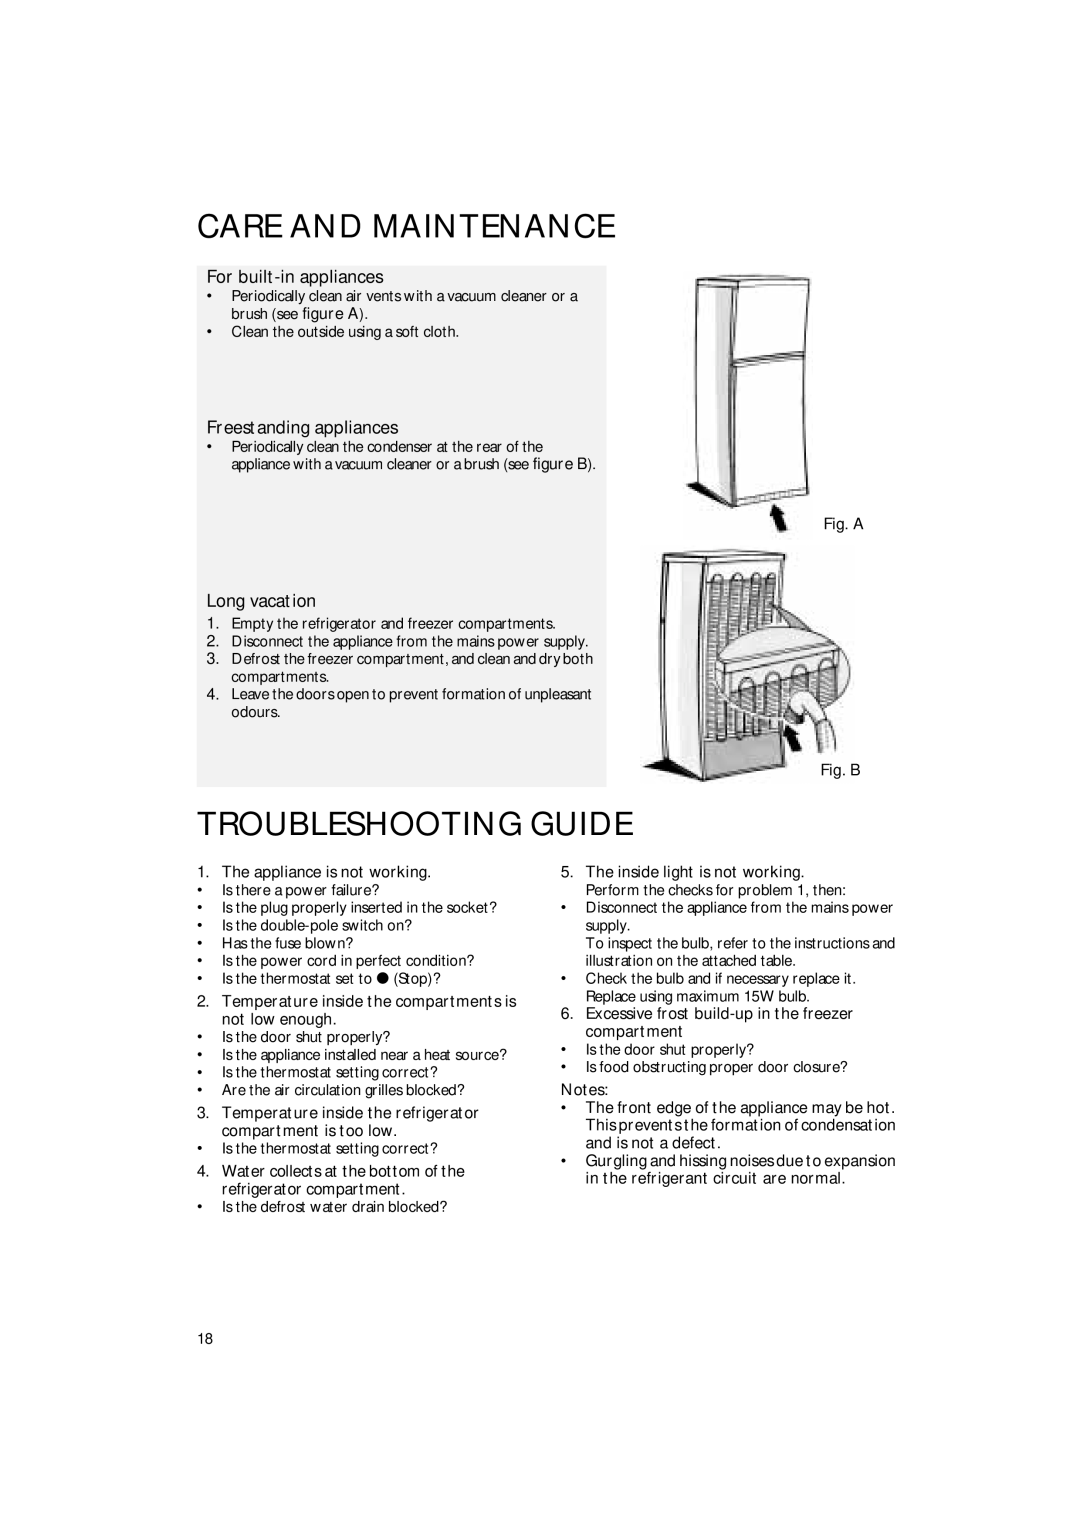 Smeg FR235A Care And Maintenance, Troubleshooting Guide, For built-in appliances, Freestanding appliances, Long vacation 